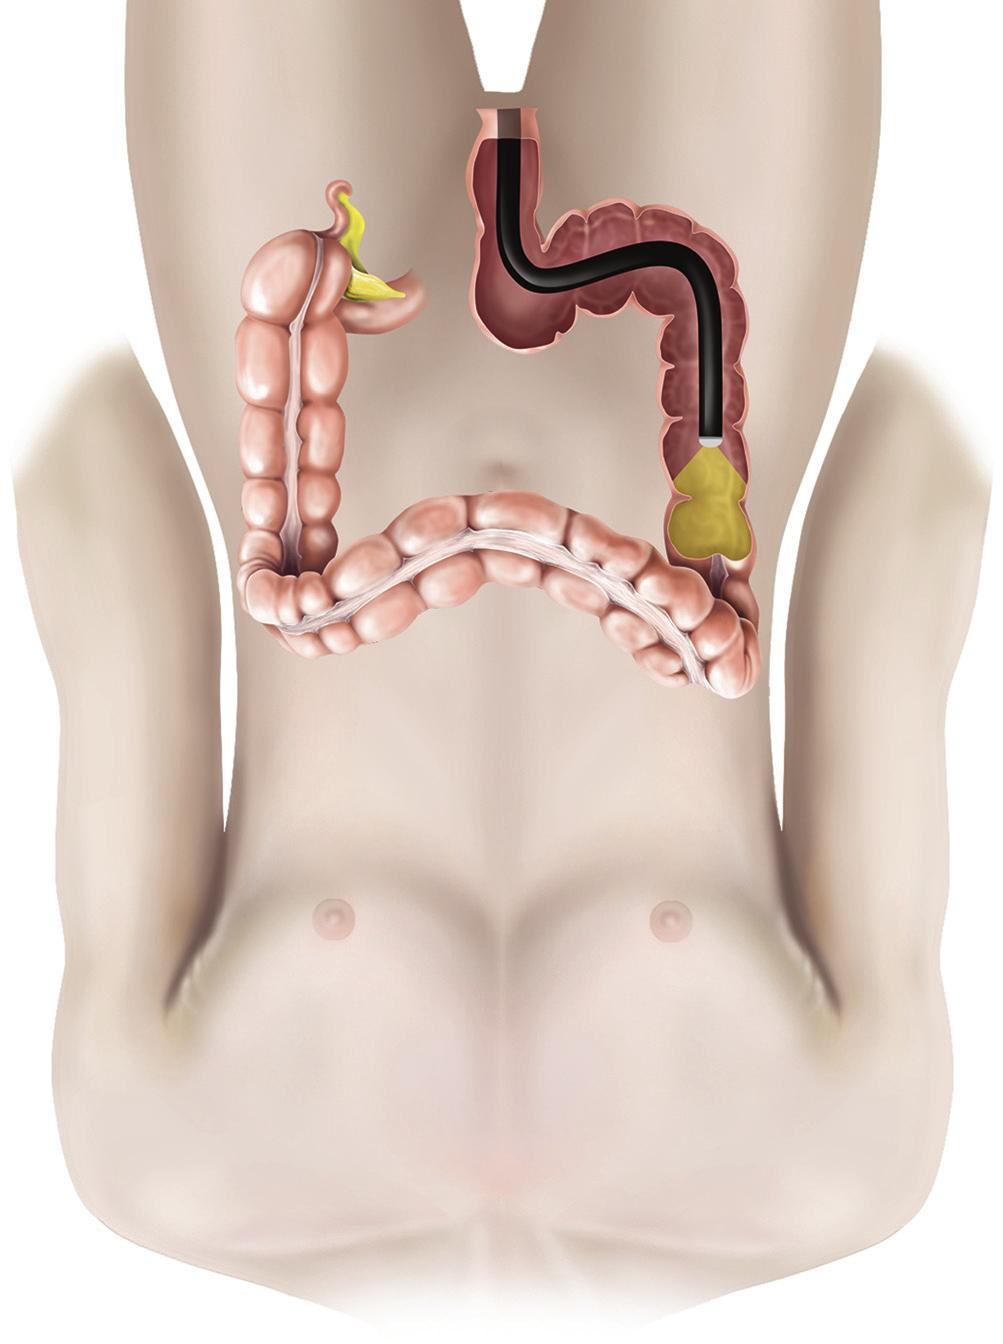 This procedure is sometimes known as a gastroscopy or simply an endoscopy. A colonoscopy is a procedure to look at the inside of your large intestine (colon) using a flexible telescope (see figure 2).